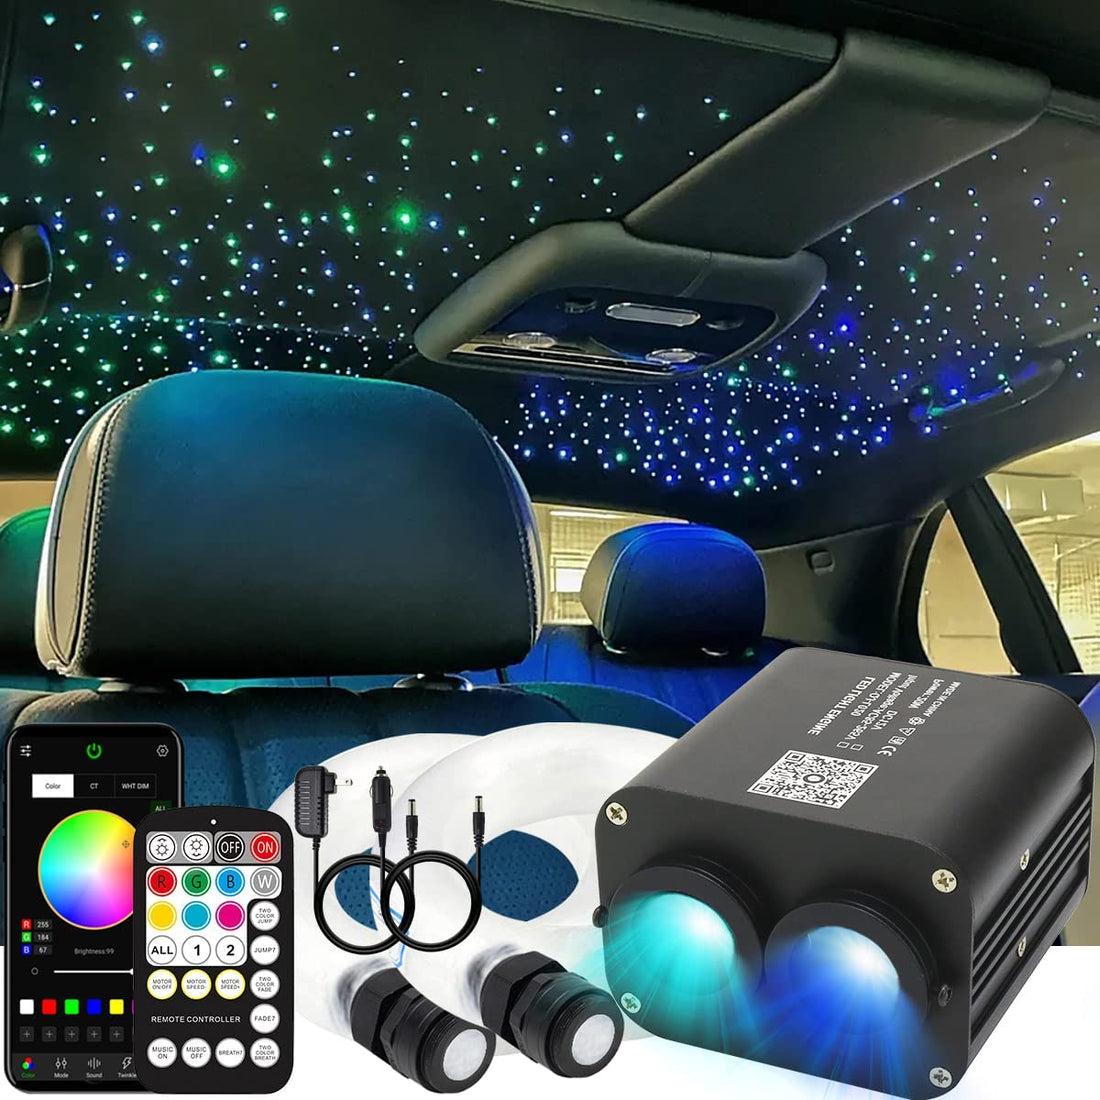 2*10W Dual Color Rolls Royce Star Ceiling Lights for Car Truck SUV | STARLIGHTheadliners.shop